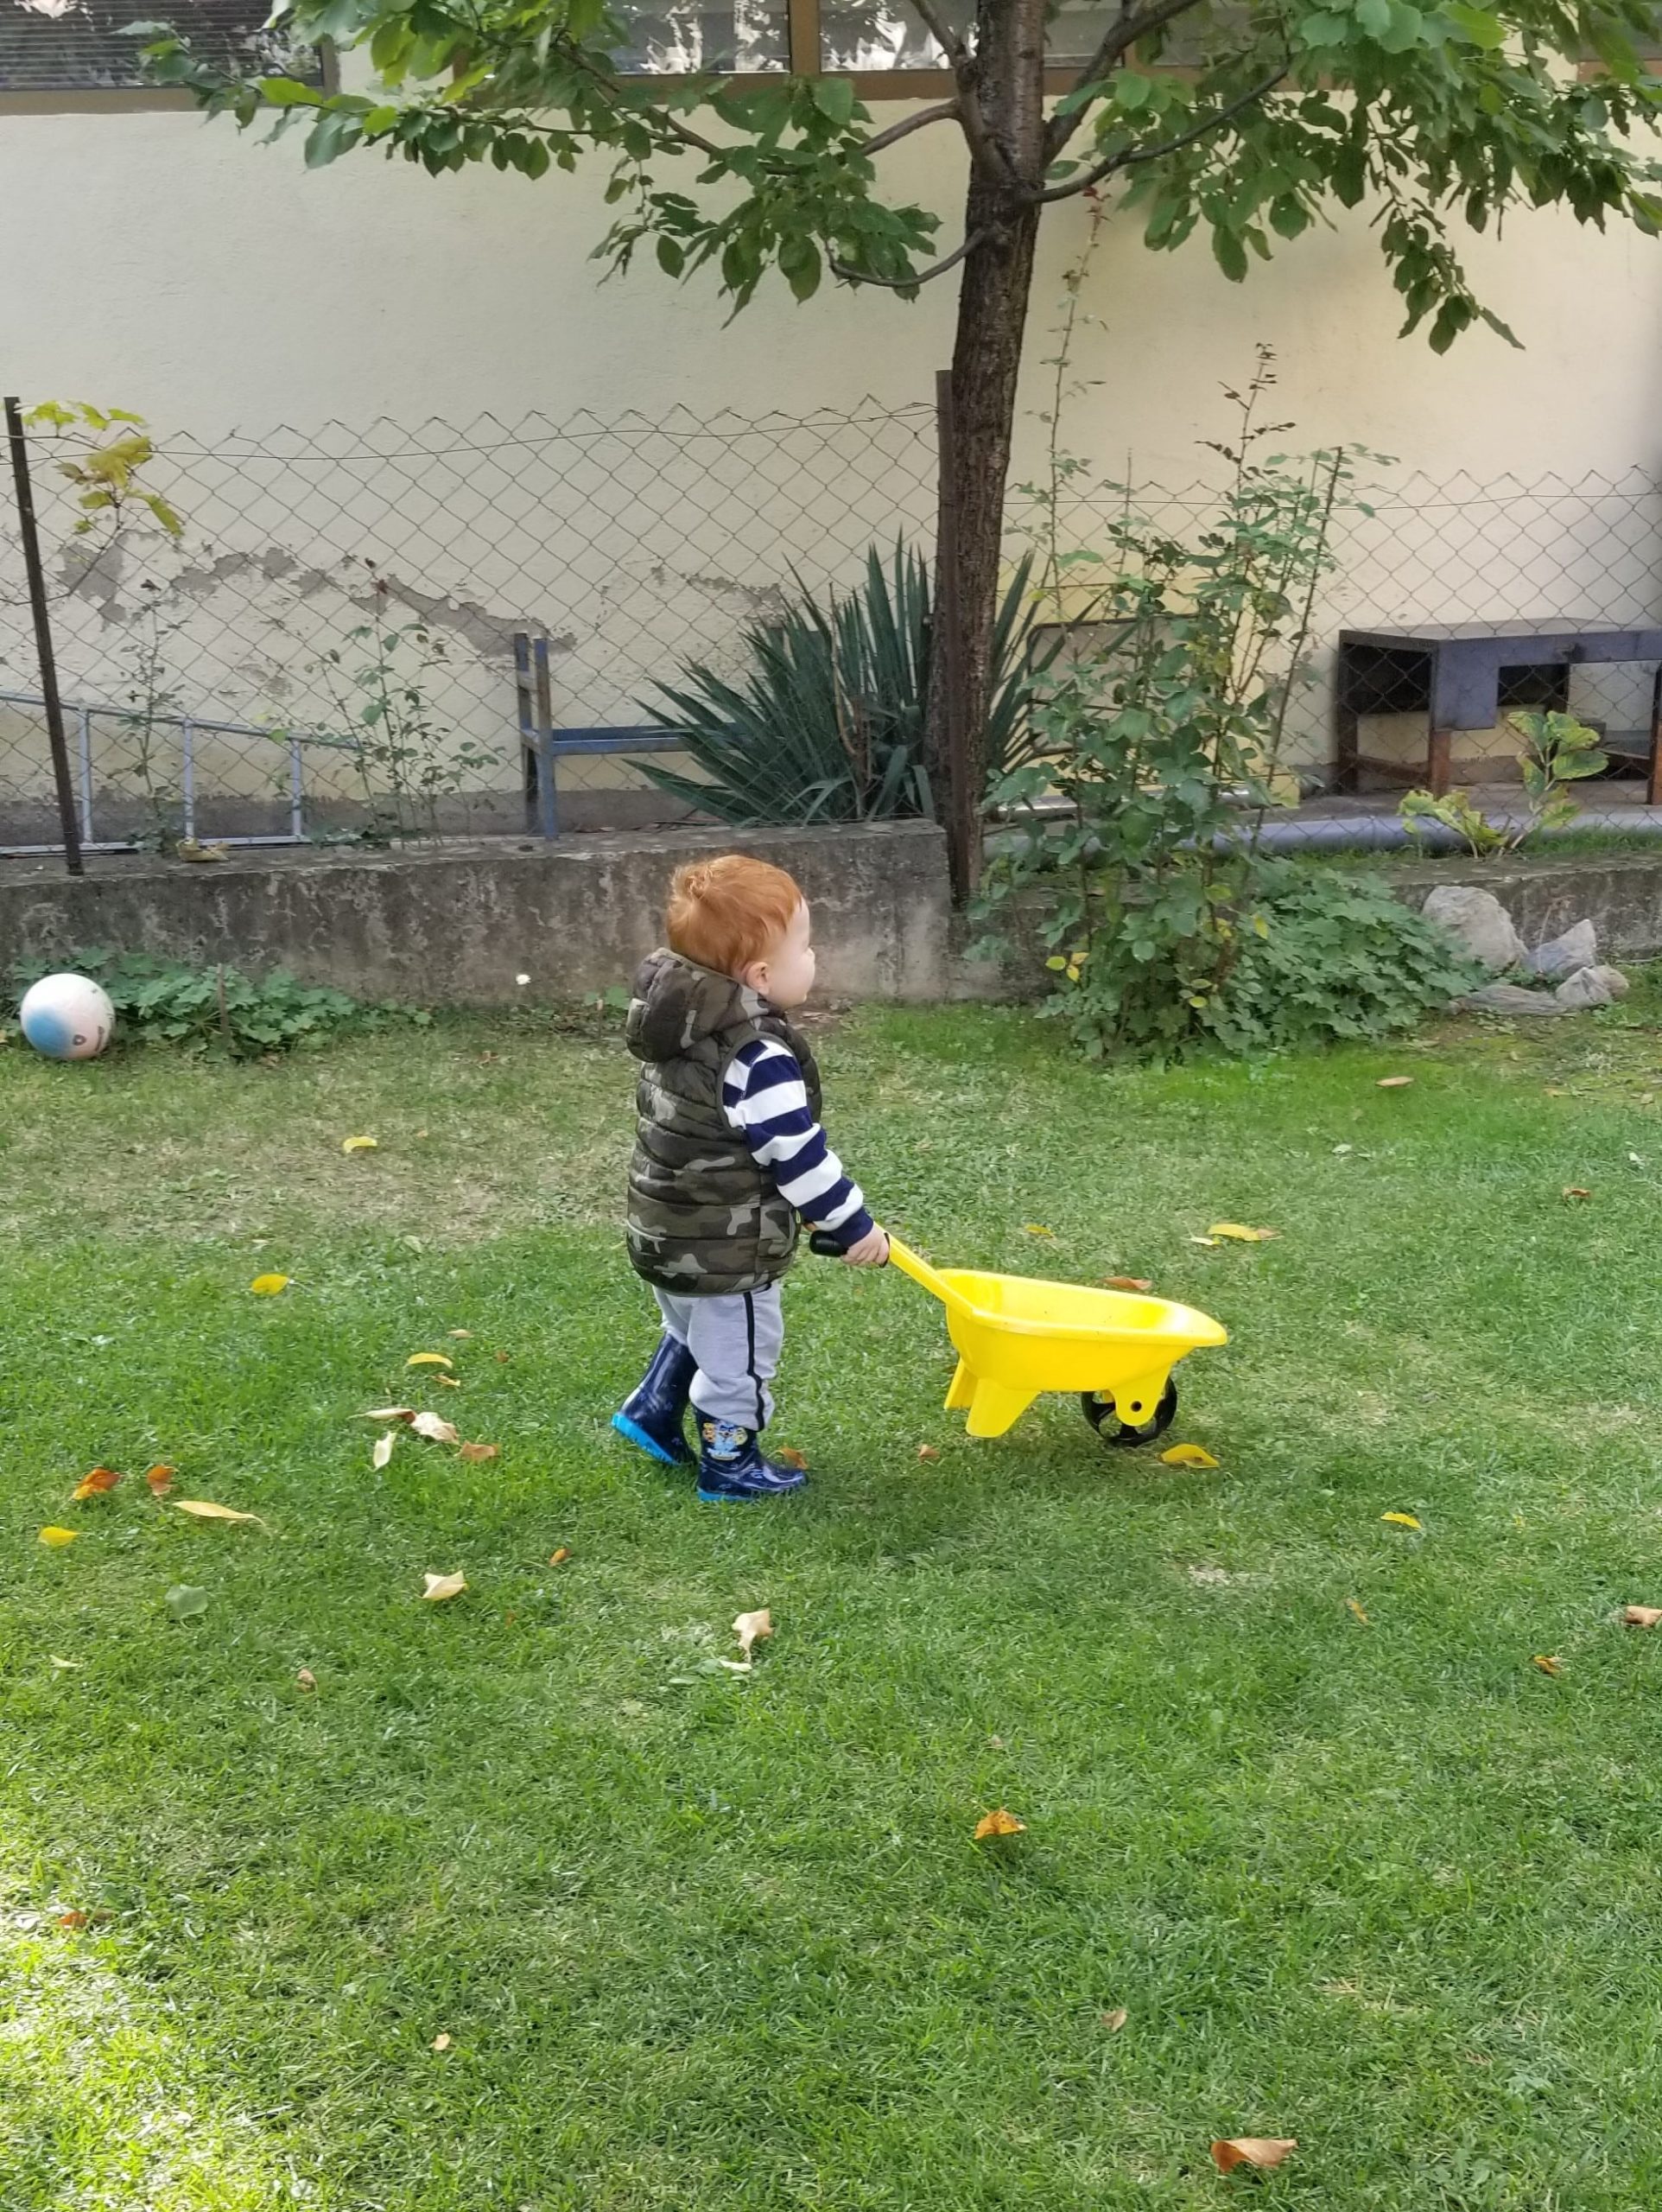 A toddler helping out in the yard